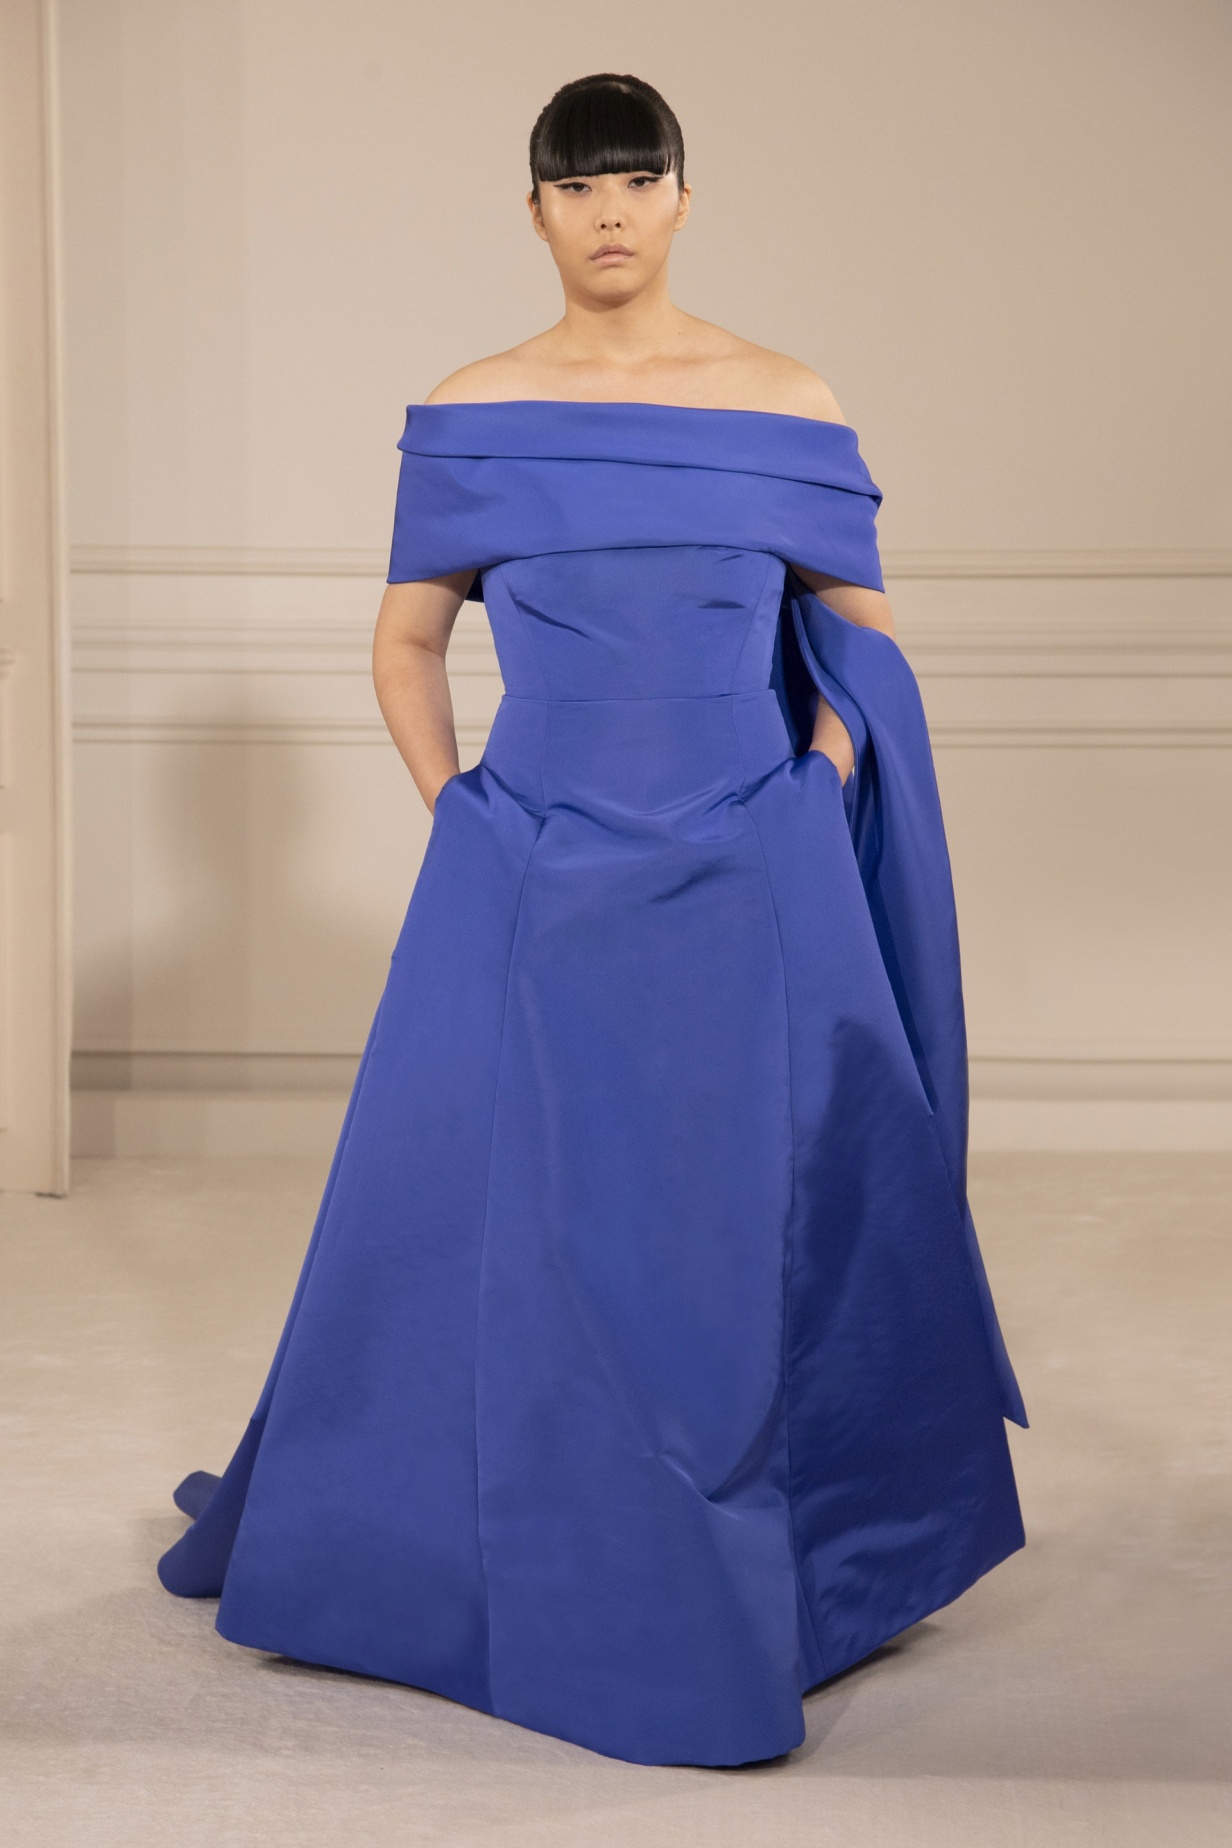 Couture 1-22 val blue.jpg